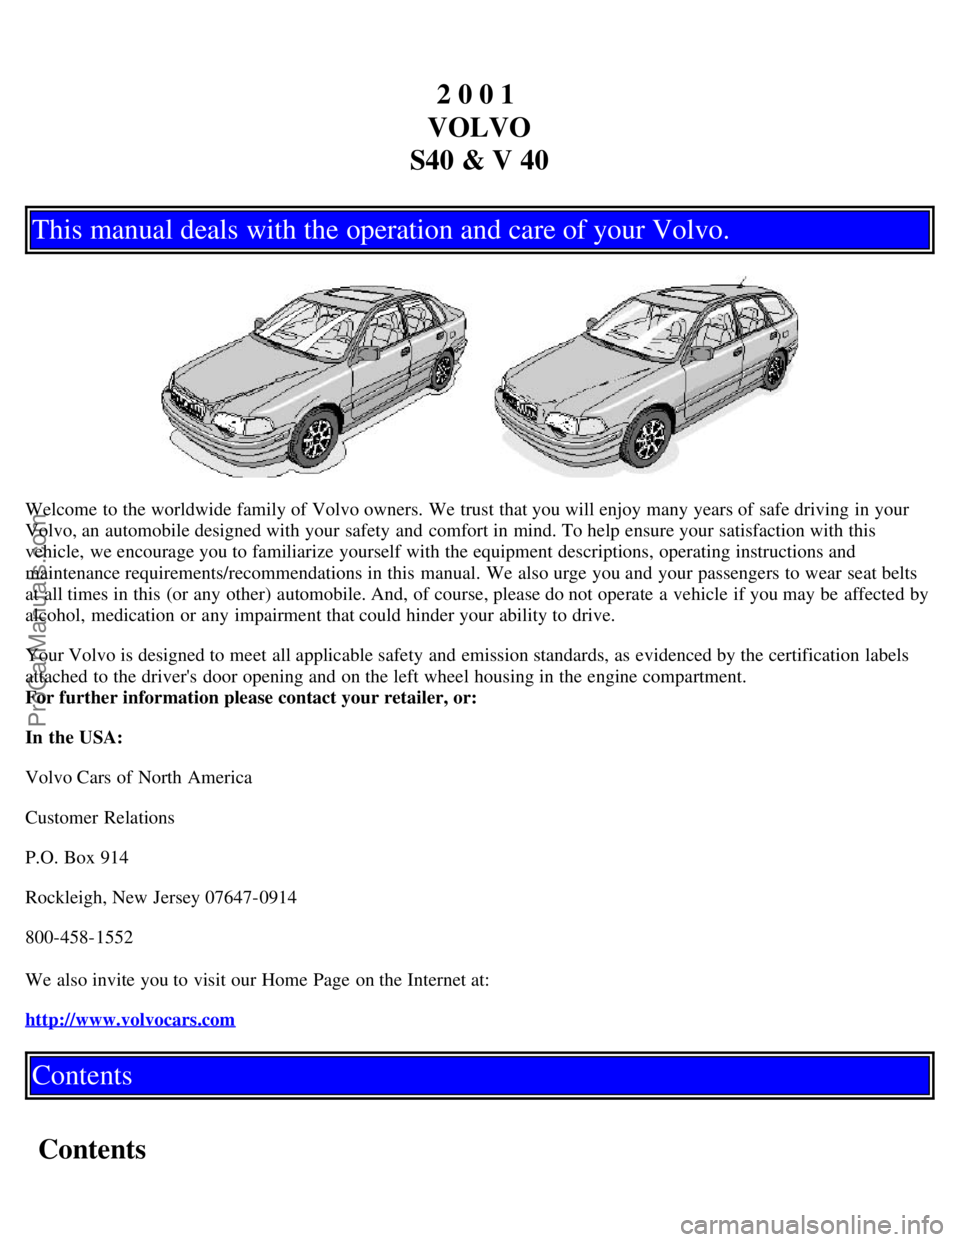 VOLVO V4 2001  Owners Manual 2 0 0 1 
VOLVO
S40 & V 40
This manual deals with the operation and care of your Volvo.
Welcome to the worldwide family of Volvo owners. We trust that you will enjoy many years of safe driving in your
